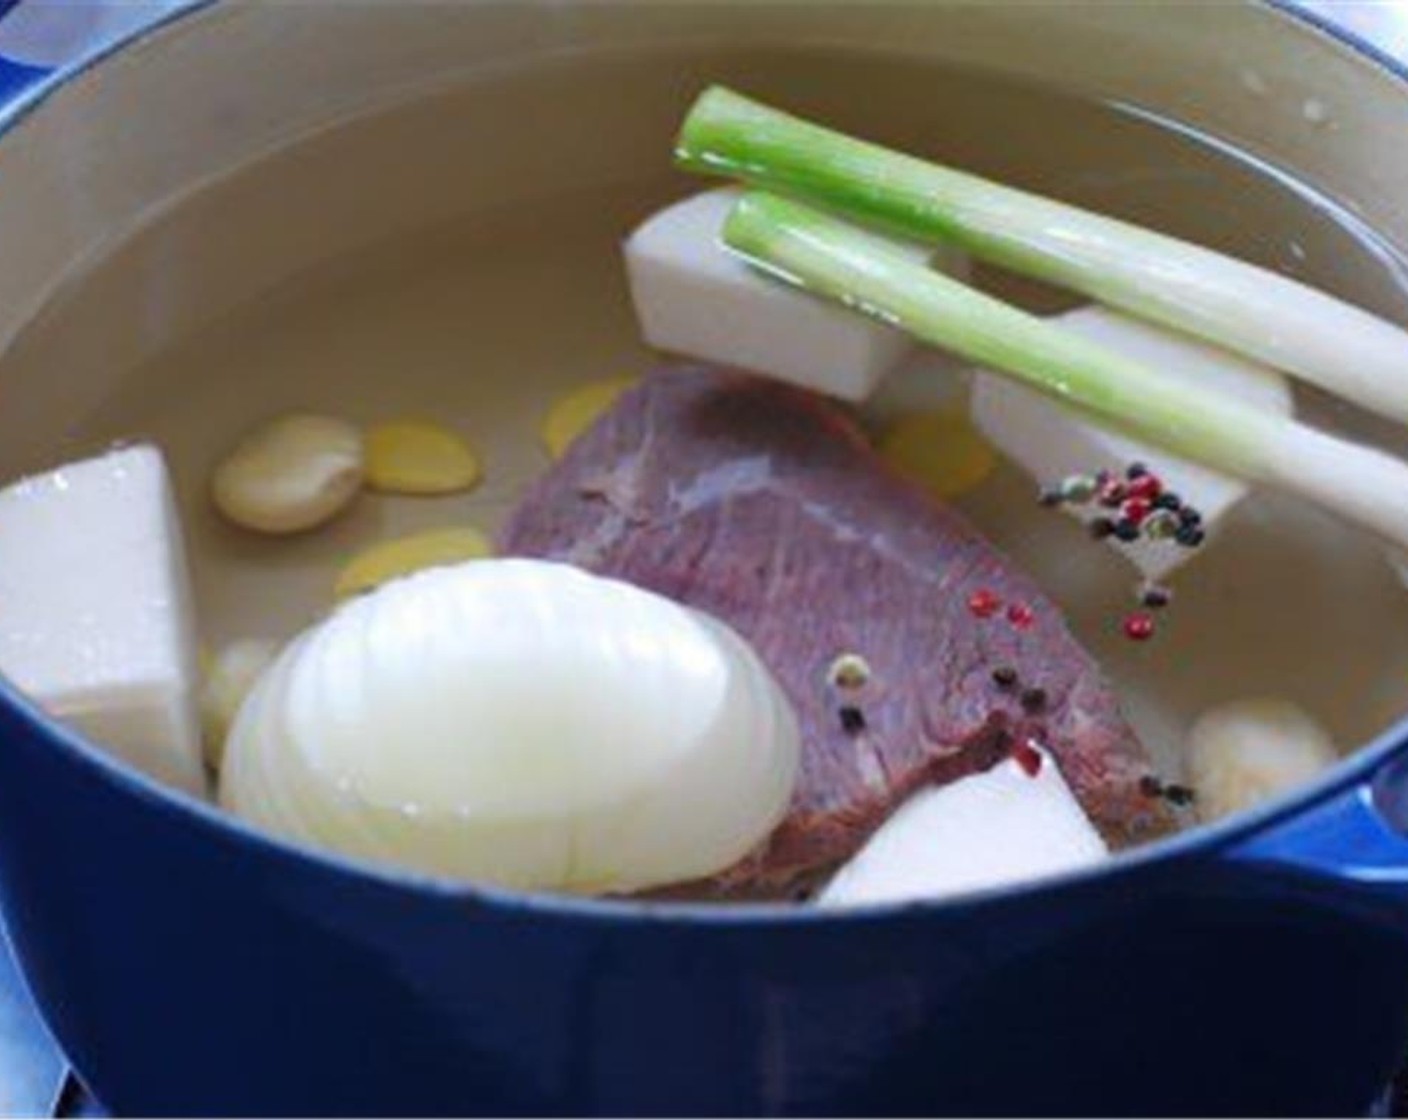 step 3 Make the broth: In a large pot, bring the Beef Brisket (8 oz), Korean Radish (6 oz), Onion (1/2), the white part of the Scallion (1 bunch), Garlic (6 cloves), Fresh Ginger (3 slices), and Peppercorns (1/2 tsp) to a boil, uncovered, in 14 cups of water.